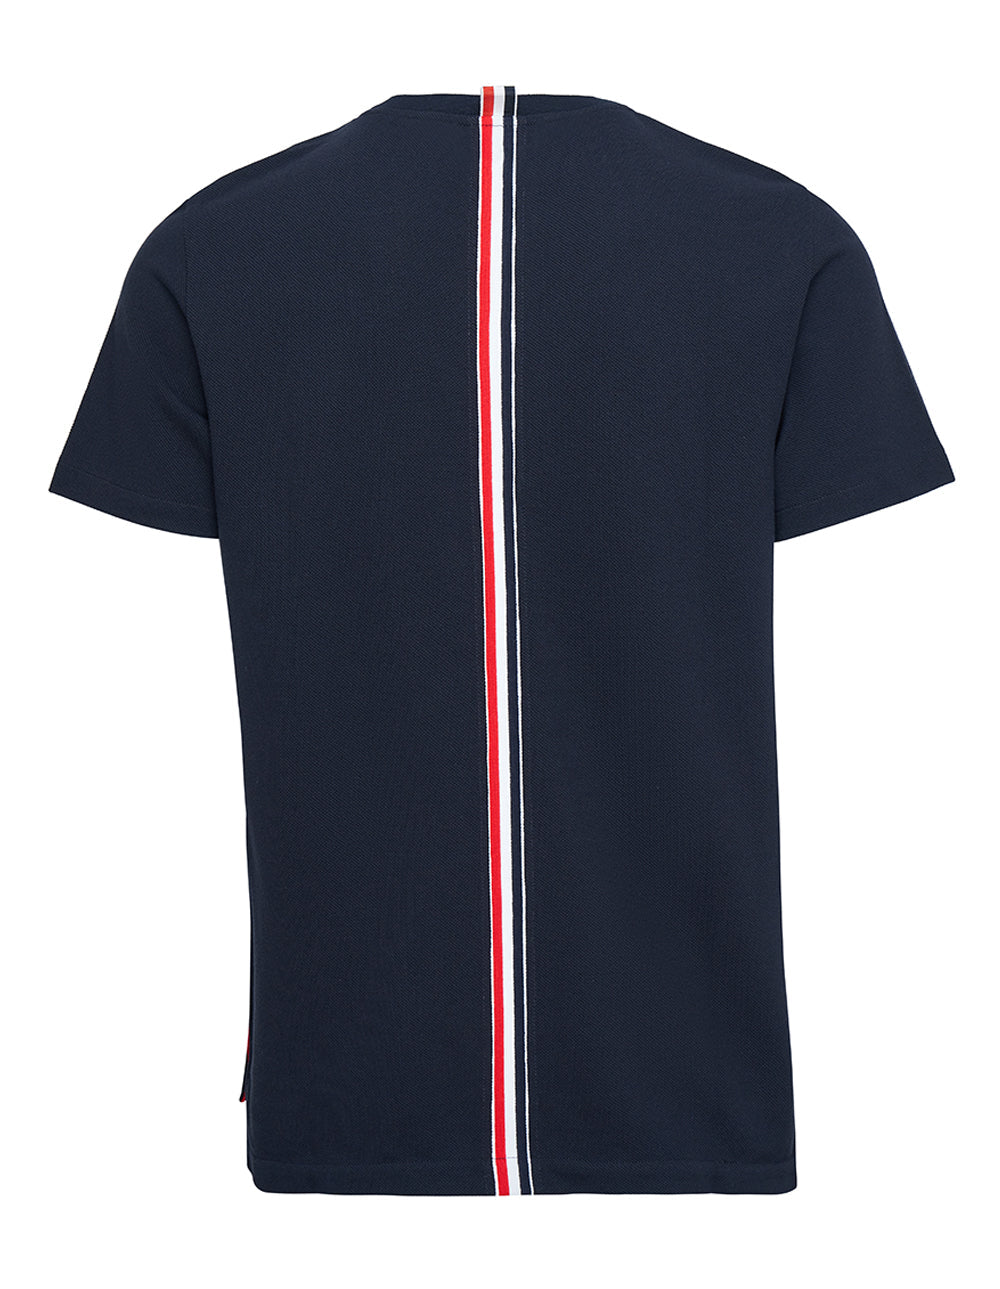 Thom Browne Relaxed Fit Tee Navy 2